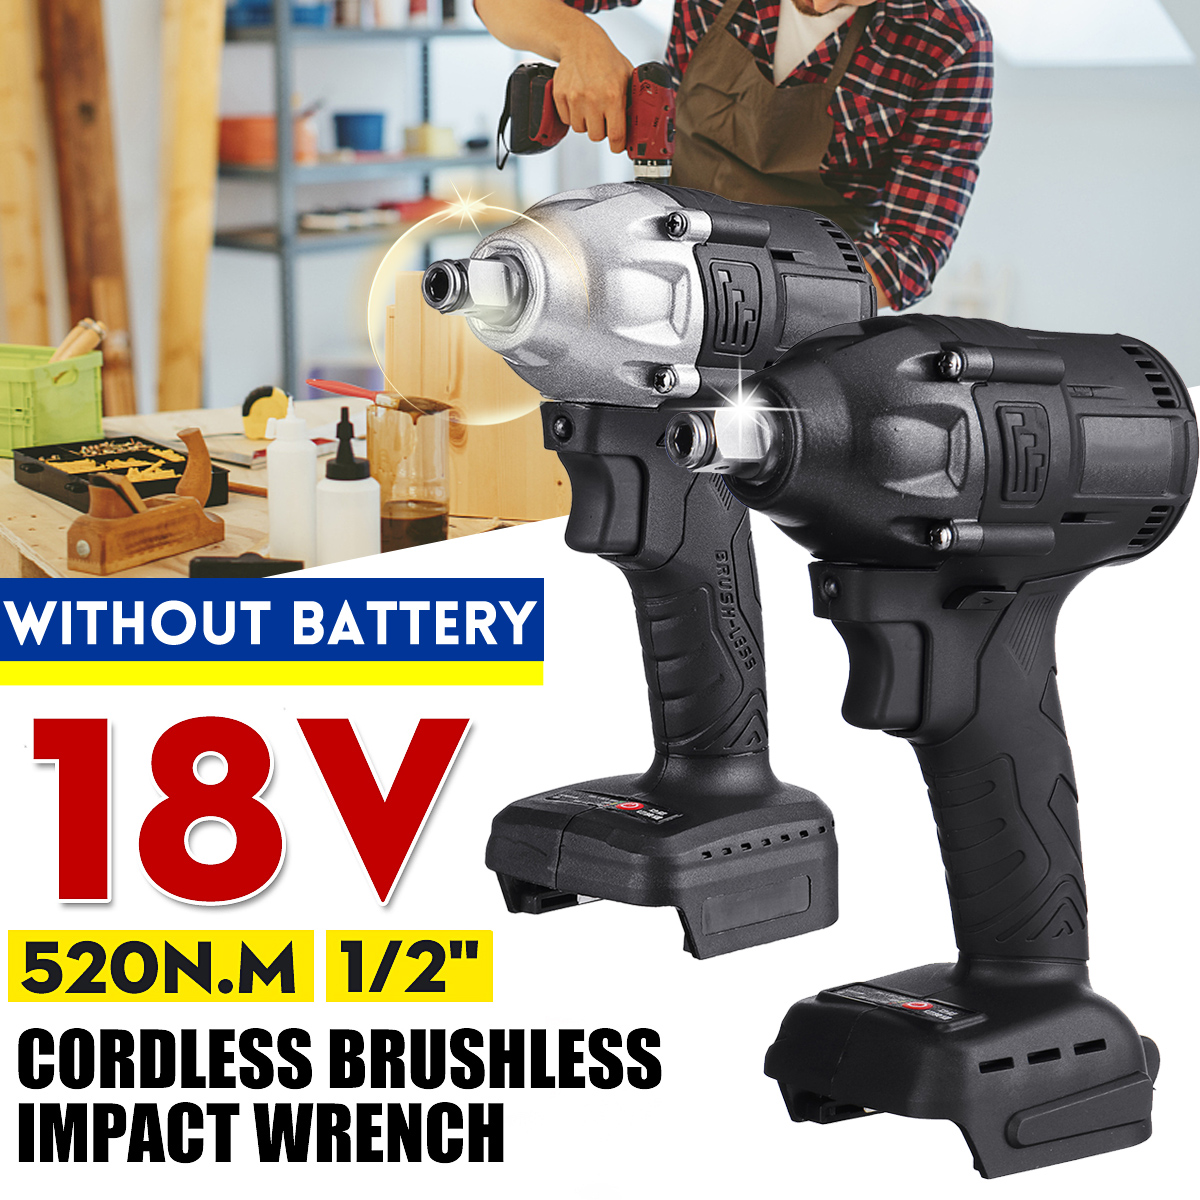 Cordless-Brushless-Electric-Impact-Wrench-For-18V-Makita-Battery-1685910-2